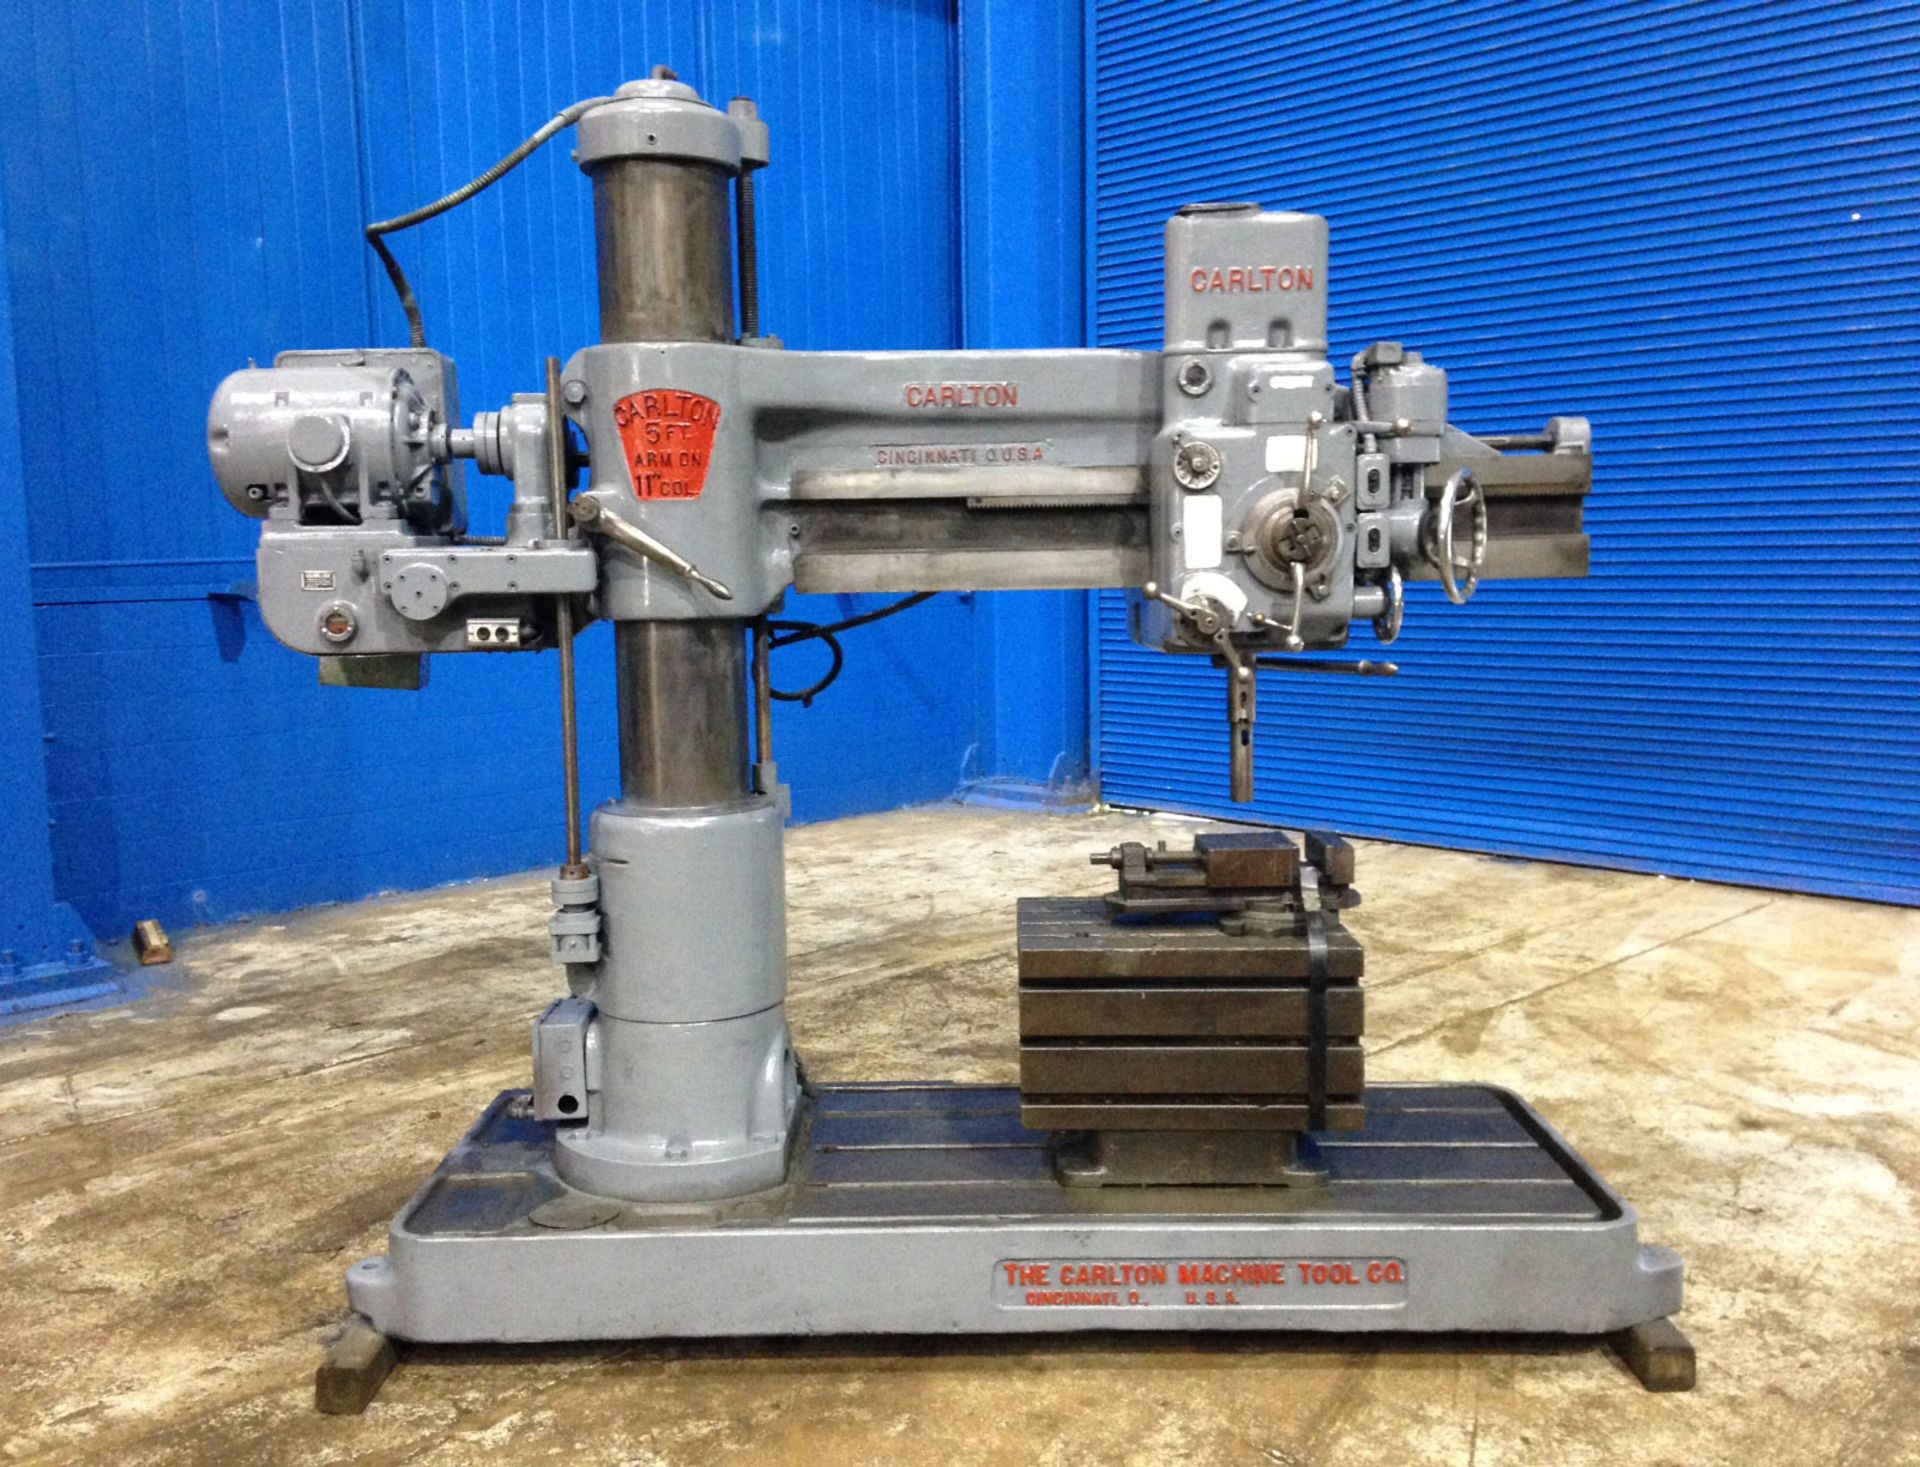 FREE LOADING - Located In: Painesville, OH - Carlton Radial Arm Drill, 5' x 11", Mdl: 1A, S/N: 1254